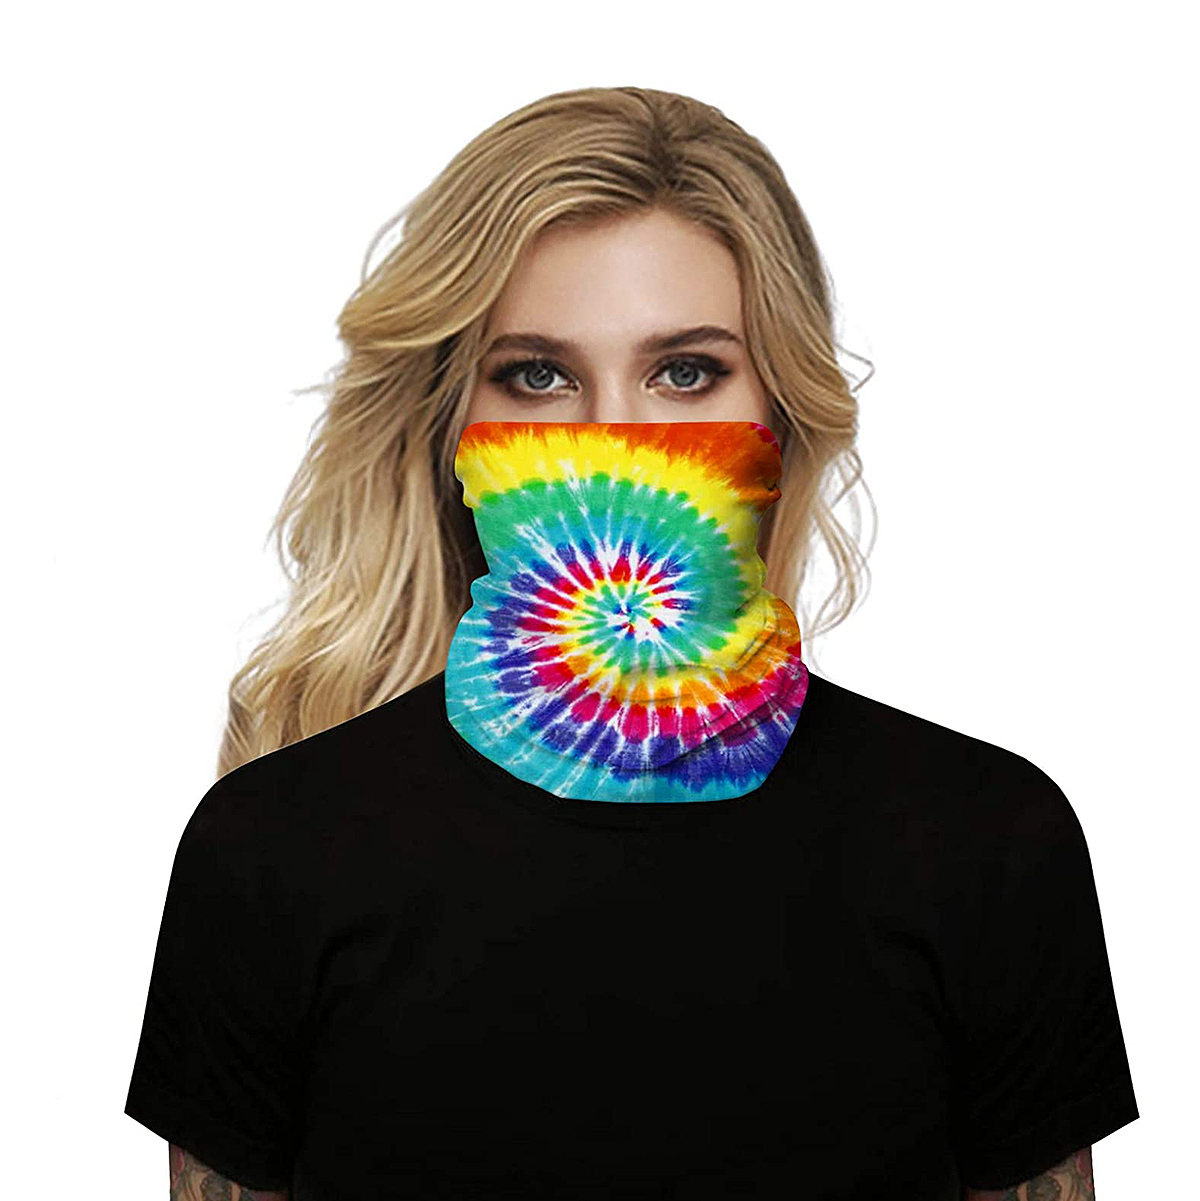 Tie Dye Face Masks 5 At Amazon That Let You Skip The Mess 